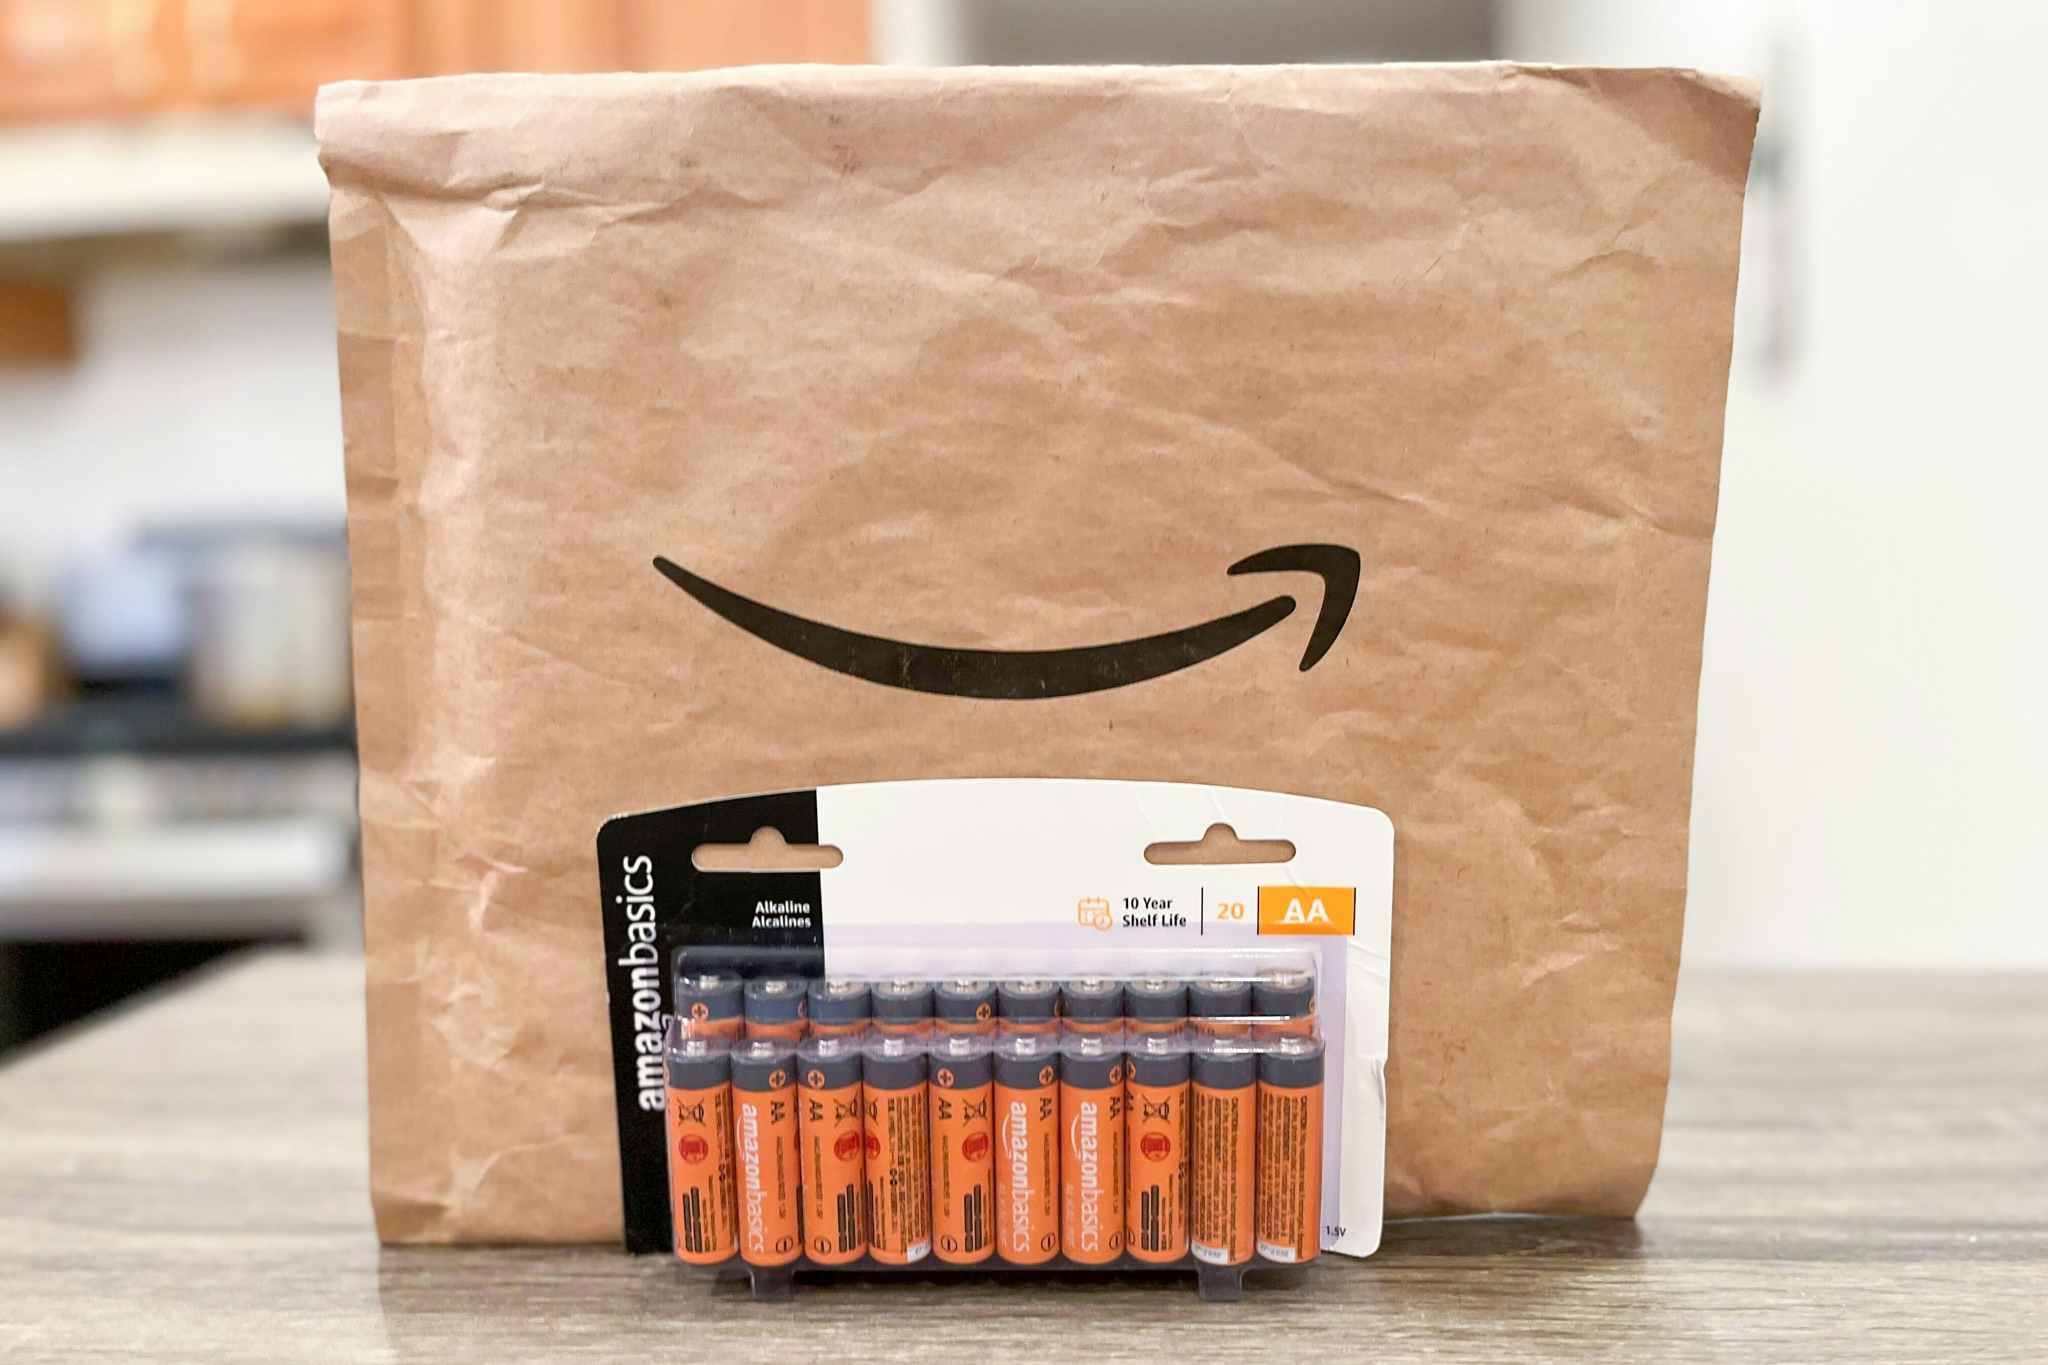 Amazon Basics AA Batteries 72-Pack, Just $15.99 Shipped With Amazon Prime